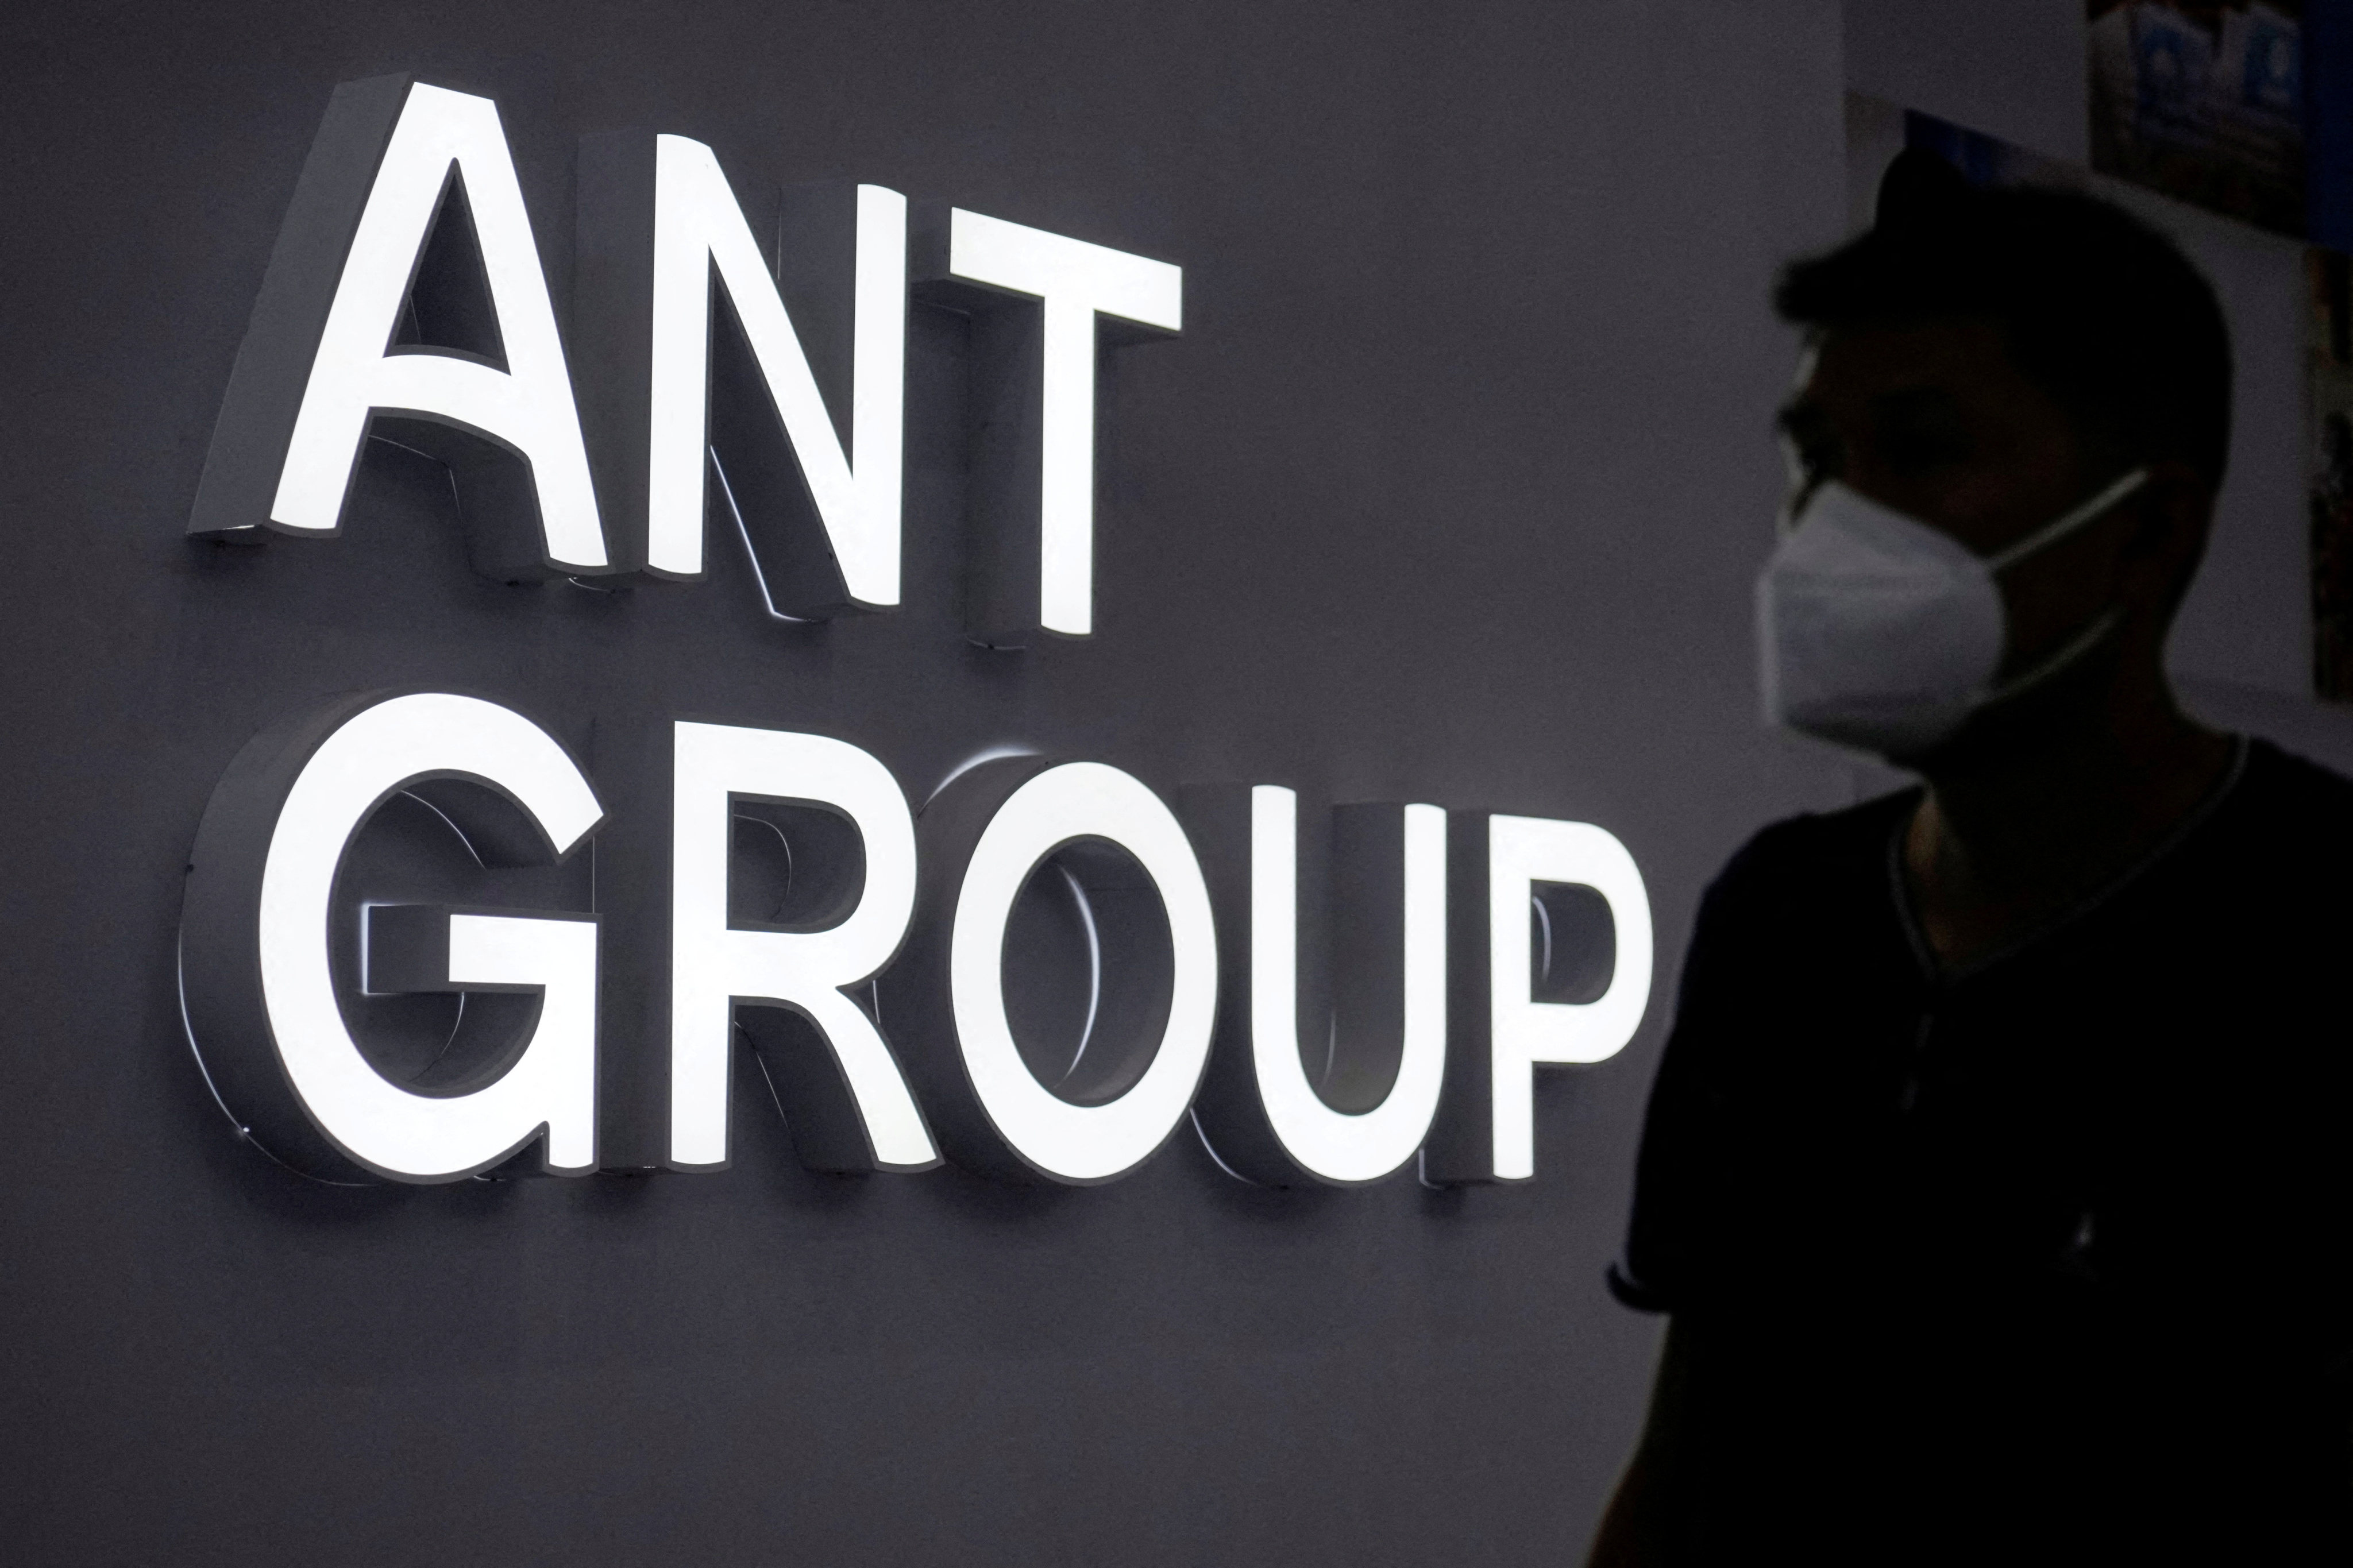 Ant Group could launch an IPO next year after Chinese authorities hinted they would end an investigation into the fintech firm. Photo: Reuters